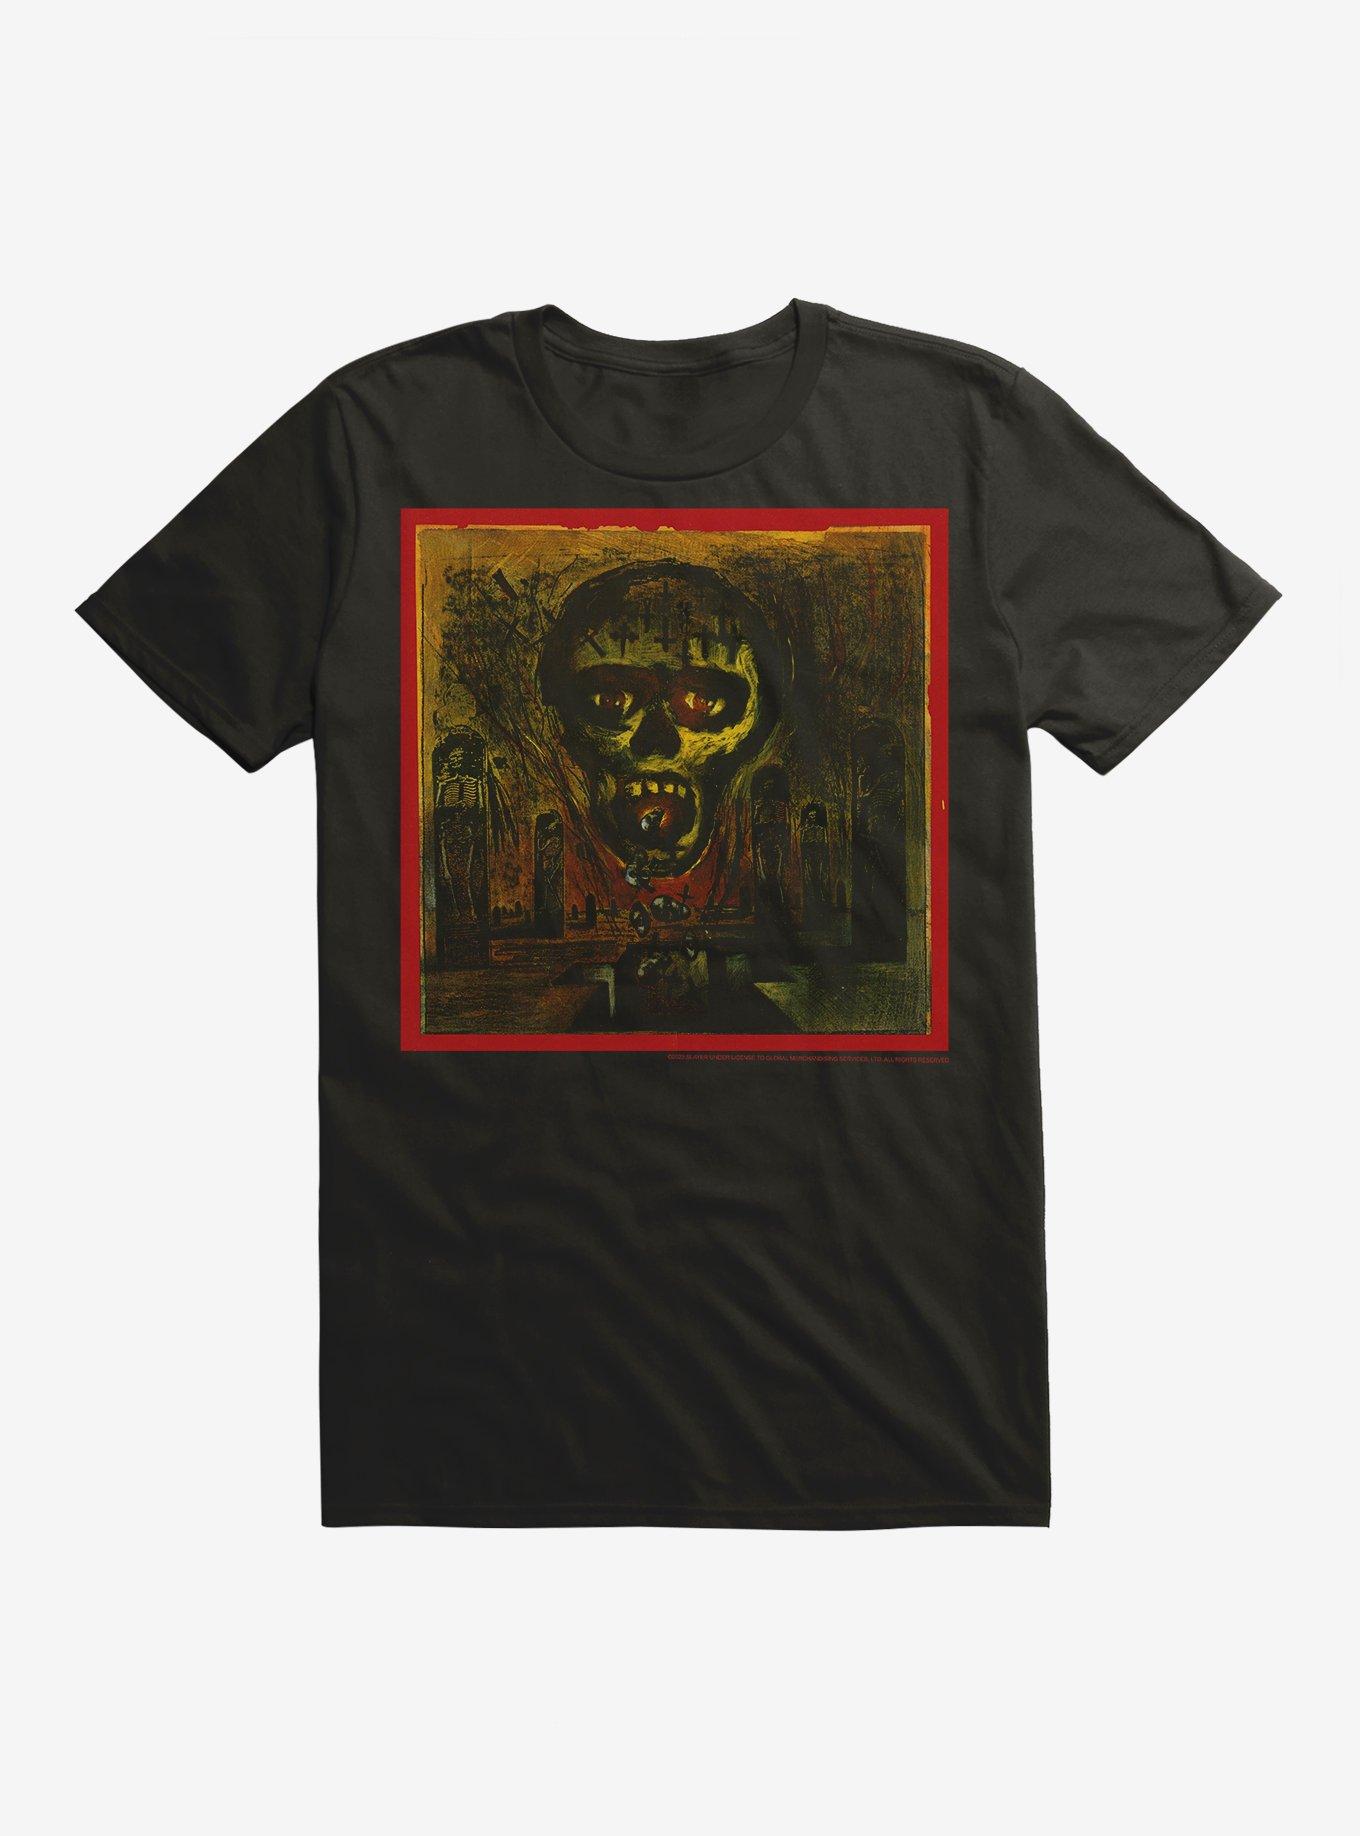 Slayer Seasons In The Abyss T-Shirt, BLACK, hi-res